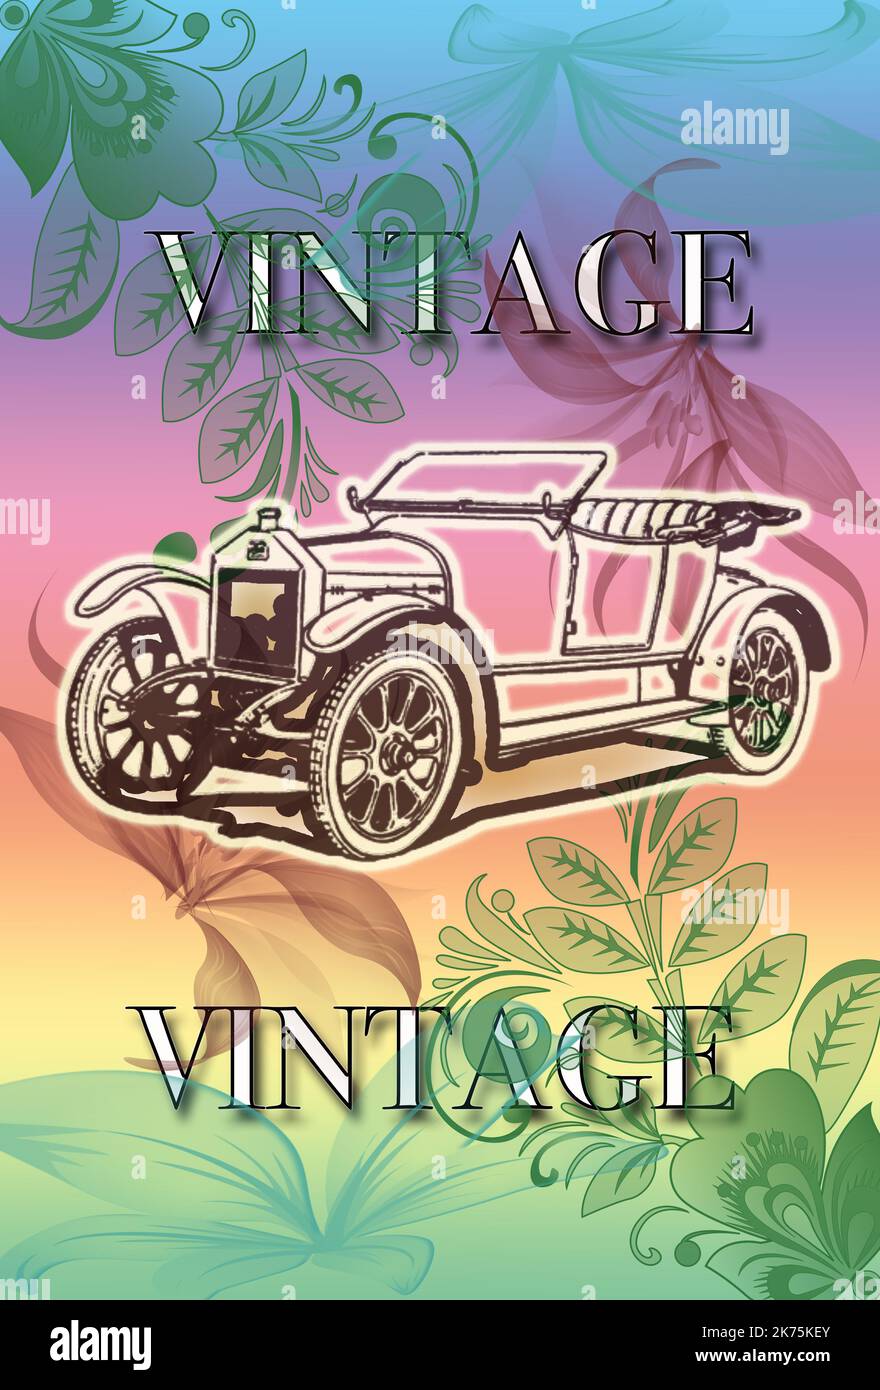 vintage illustration of old or classic car Stock Photo